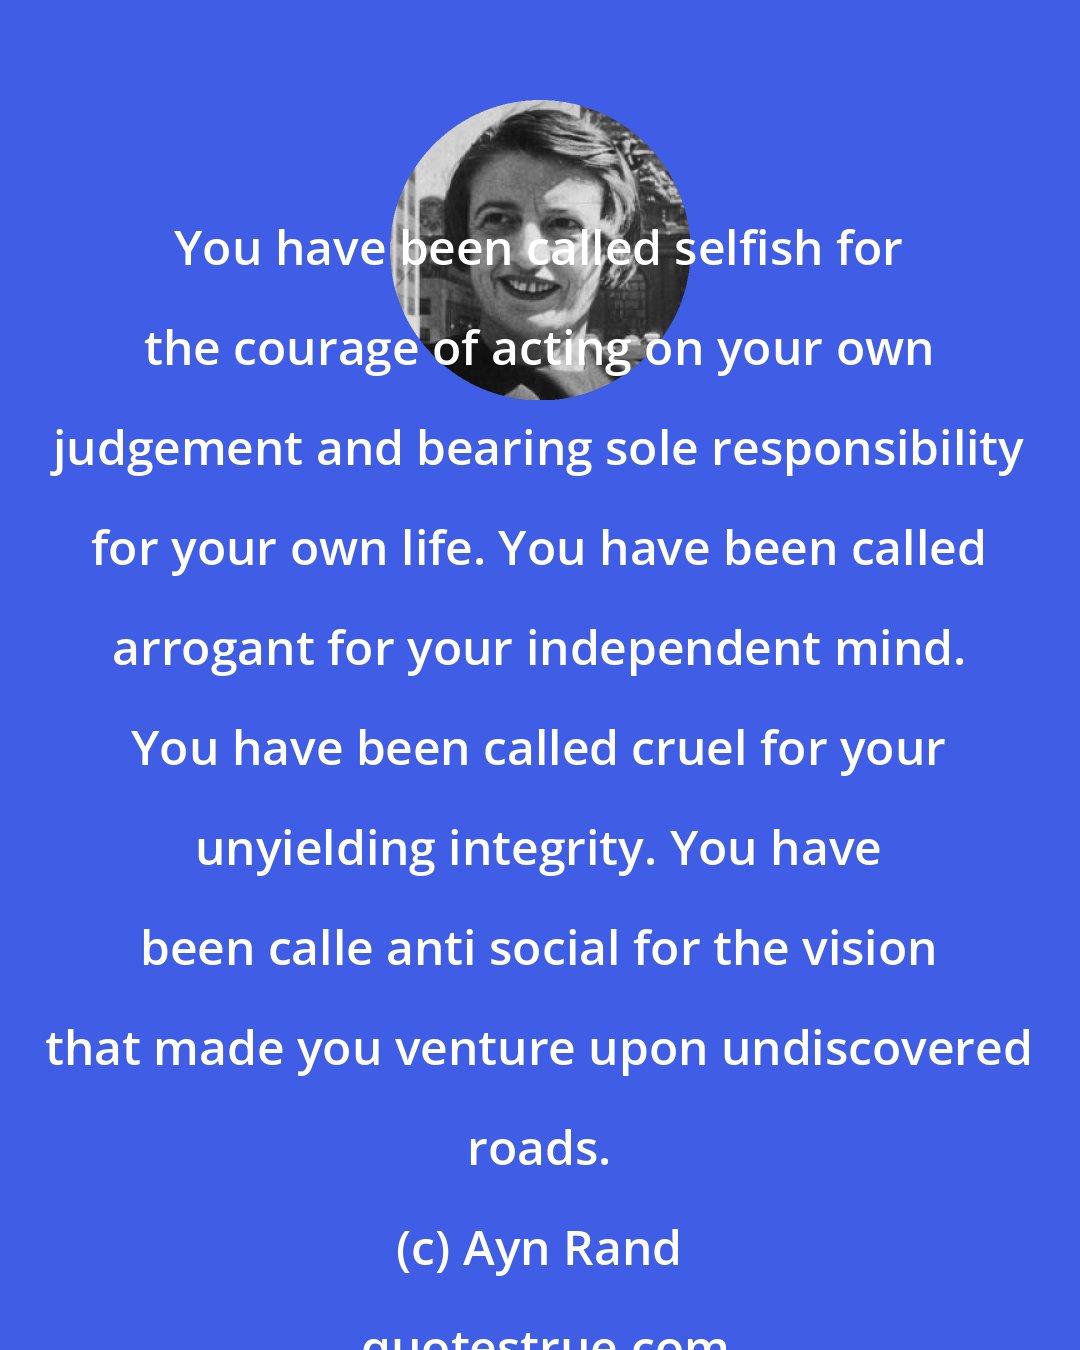 Ayn Rand: You have been called selfish for the courage of acting on your own judgement and bearing sole responsibility for your own life. You have been called arrogant for your independent mind. You have been called cruel for your unyielding integrity. You have been calle anti social for the vision that made you venture upon undiscovered roads.